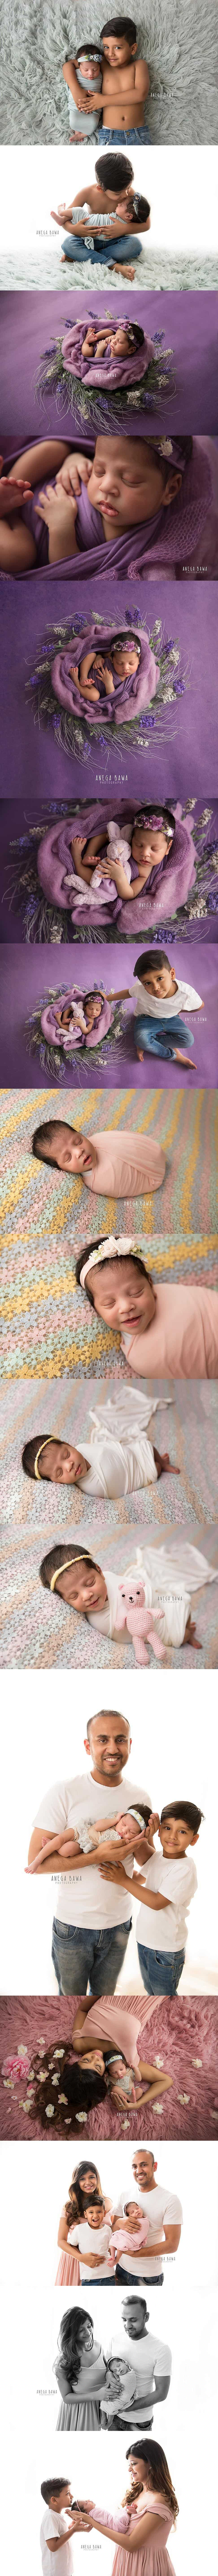 202_newborn_photography_session_in_delhi_11_days_old_baby_girl_anega_bawa_photography (15)